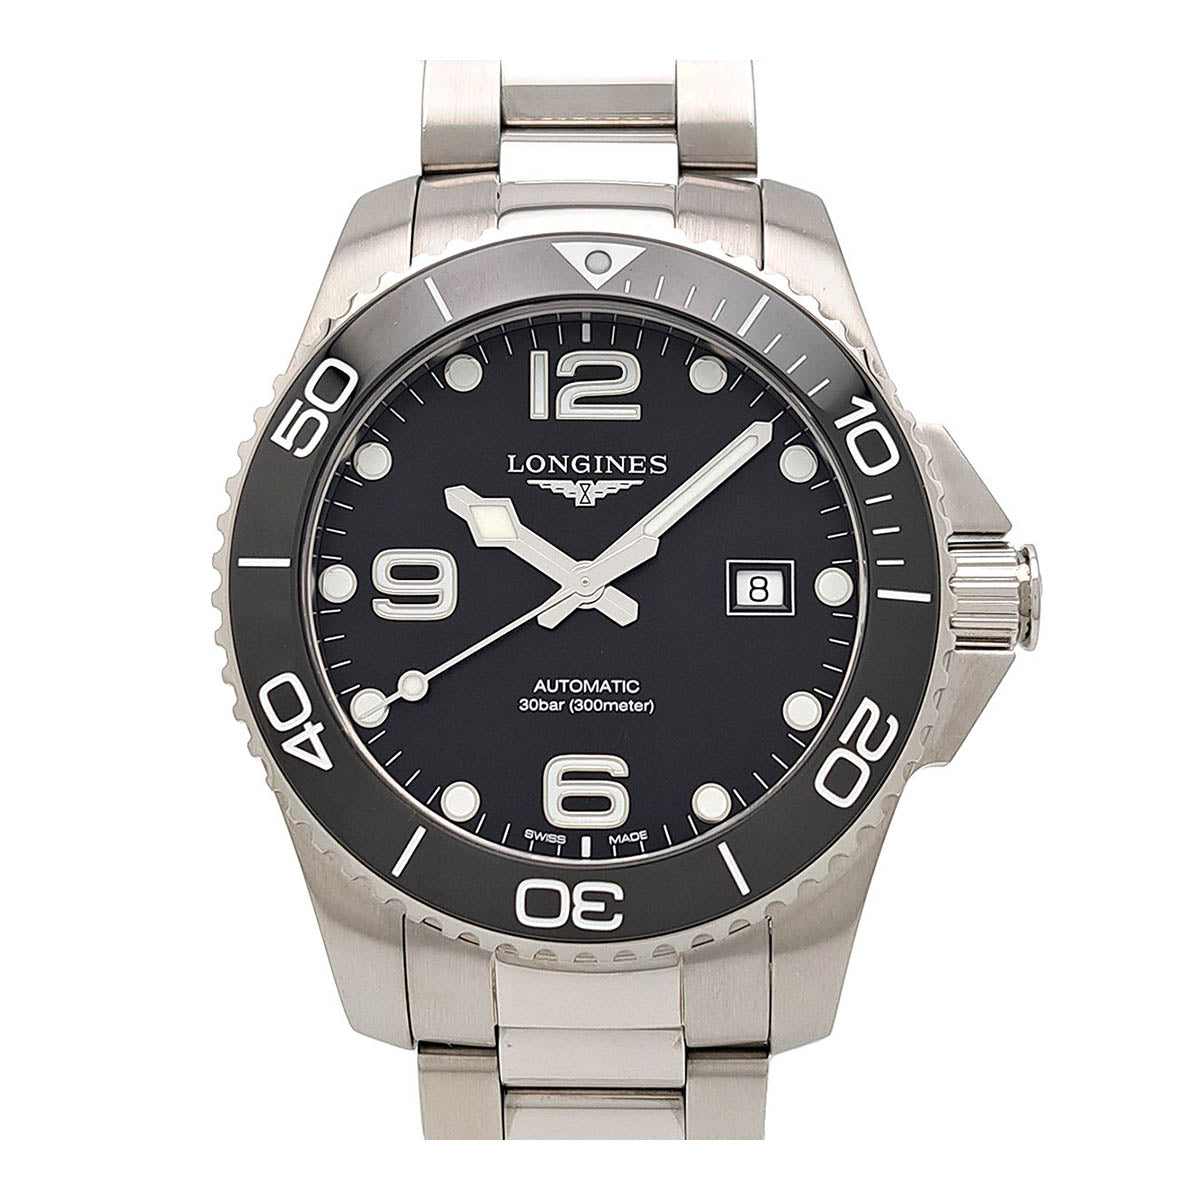 Longines "HydroConquest" Men's Automatic Wristwatch in Stainless Steel  L3.782.4.56.6